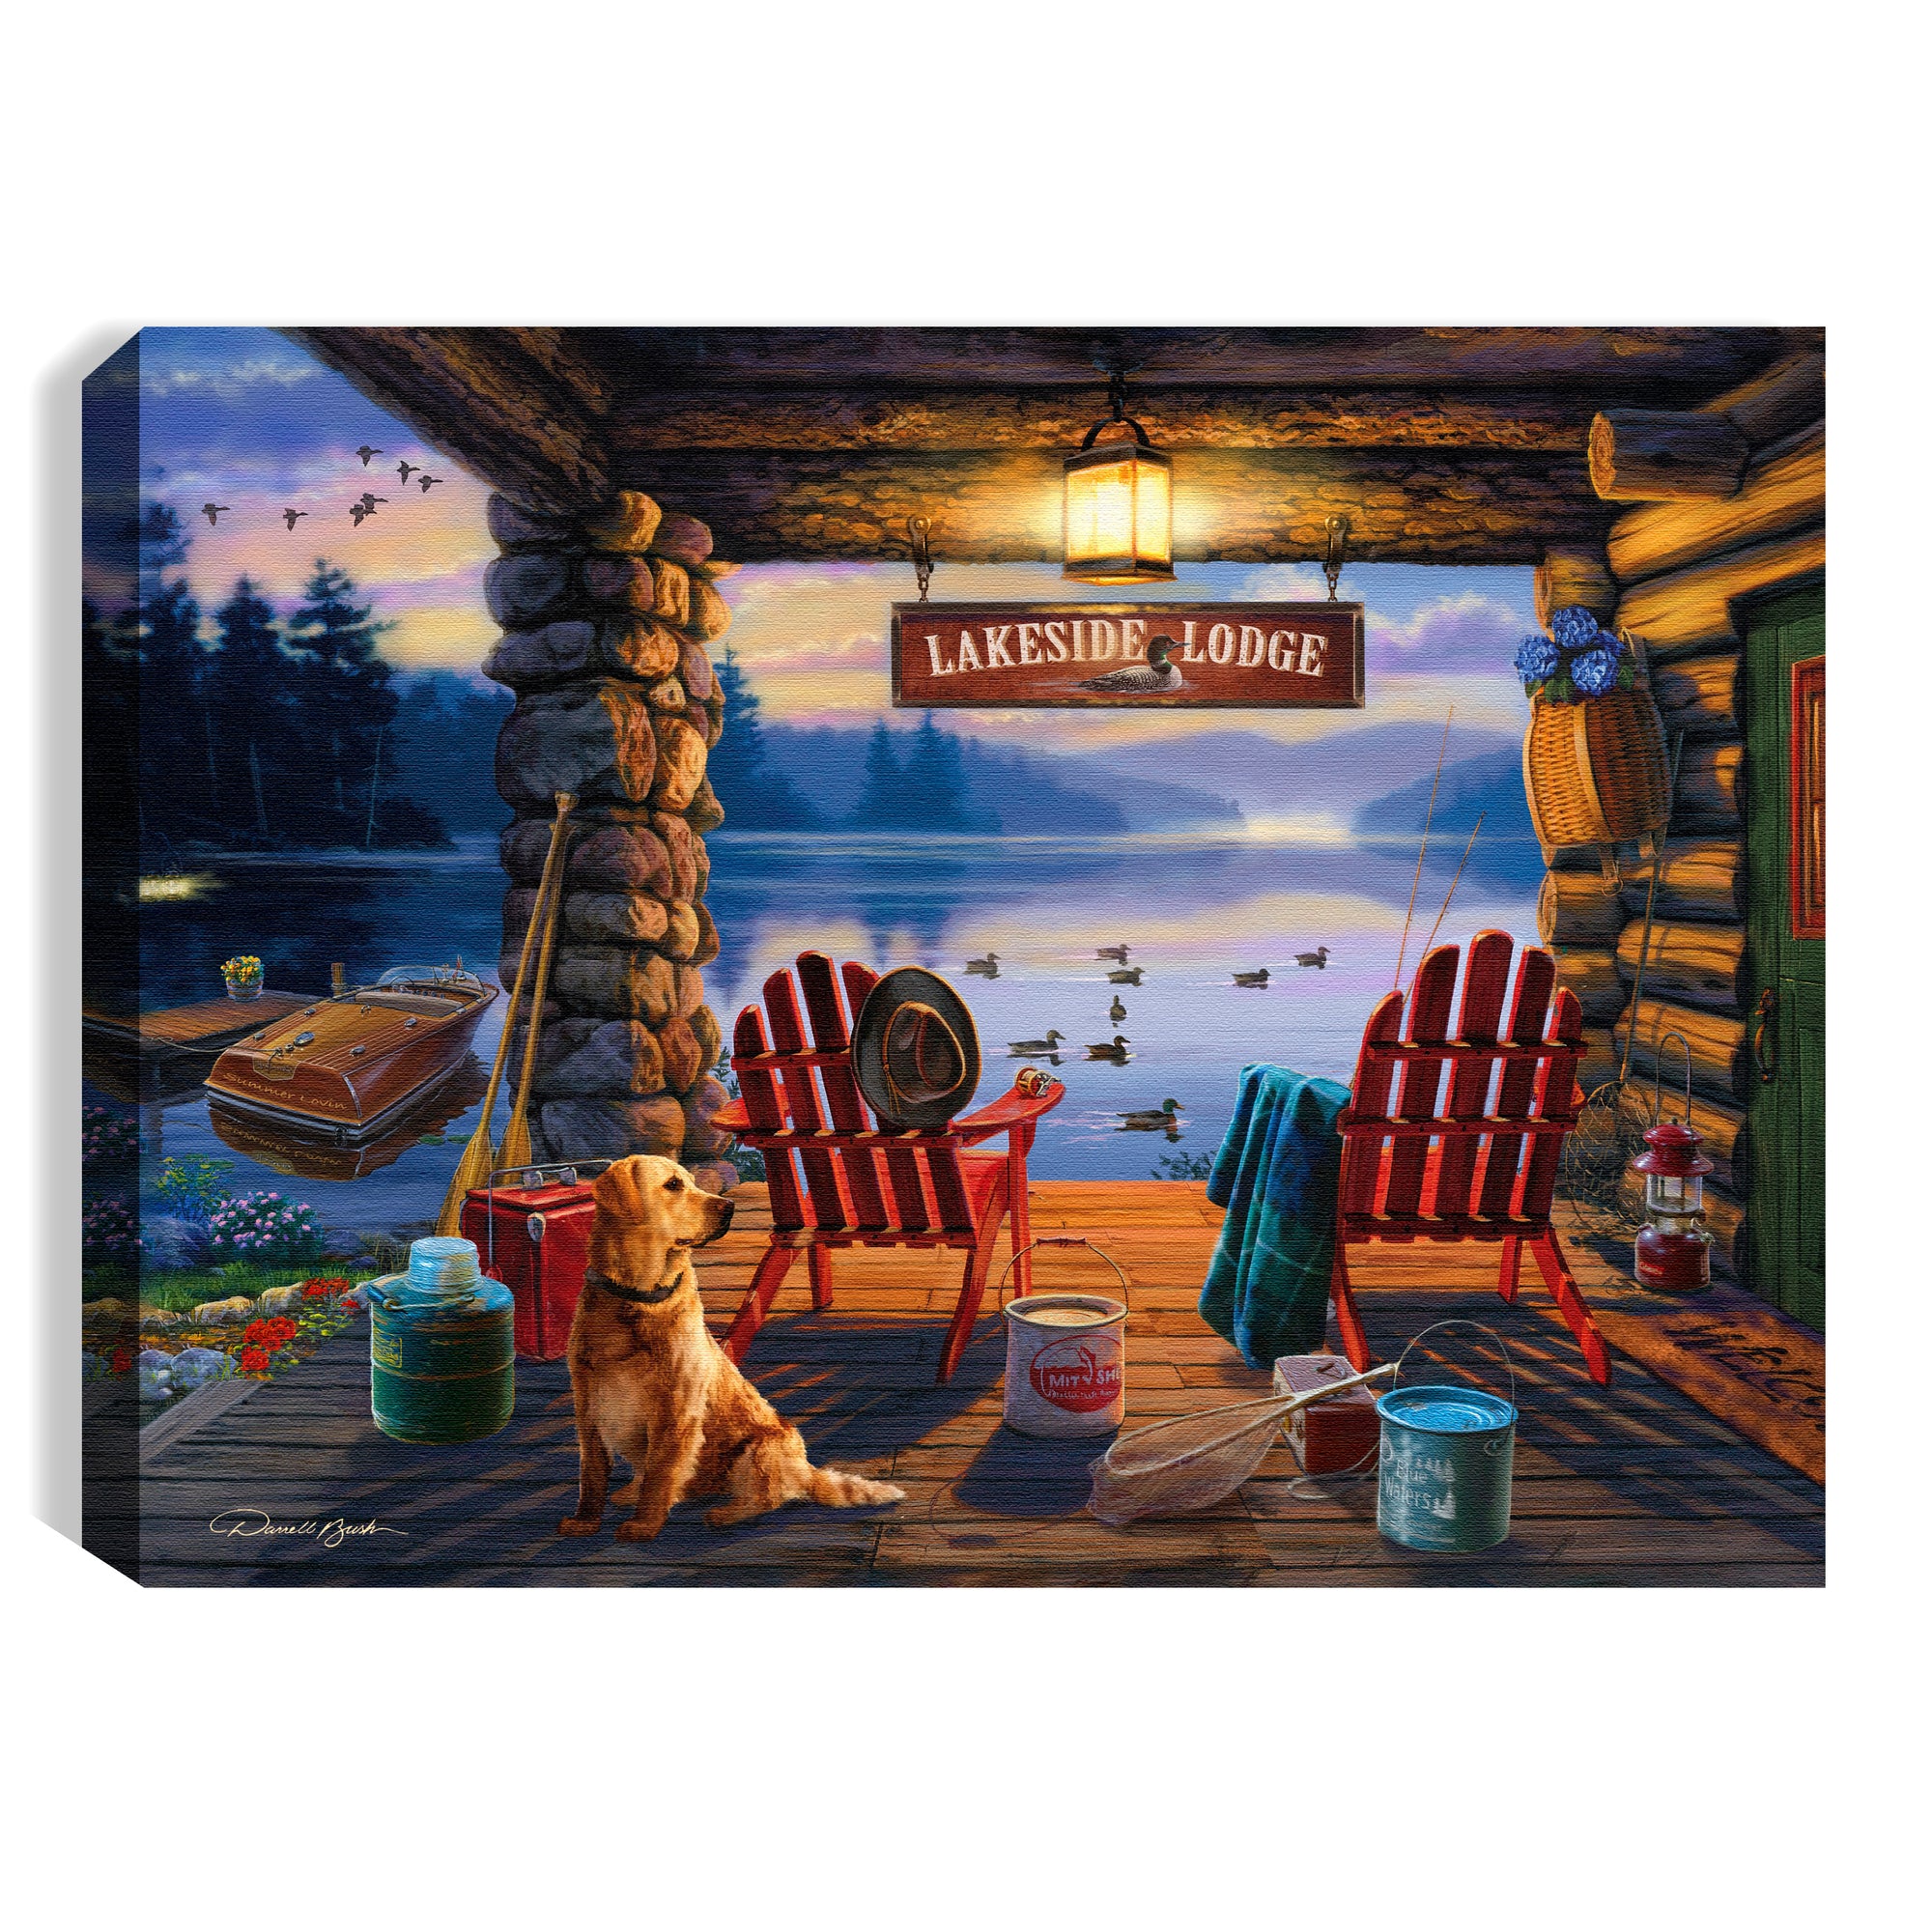 Lakeside Lodge 8x6 Lighted Tabletop Canvas